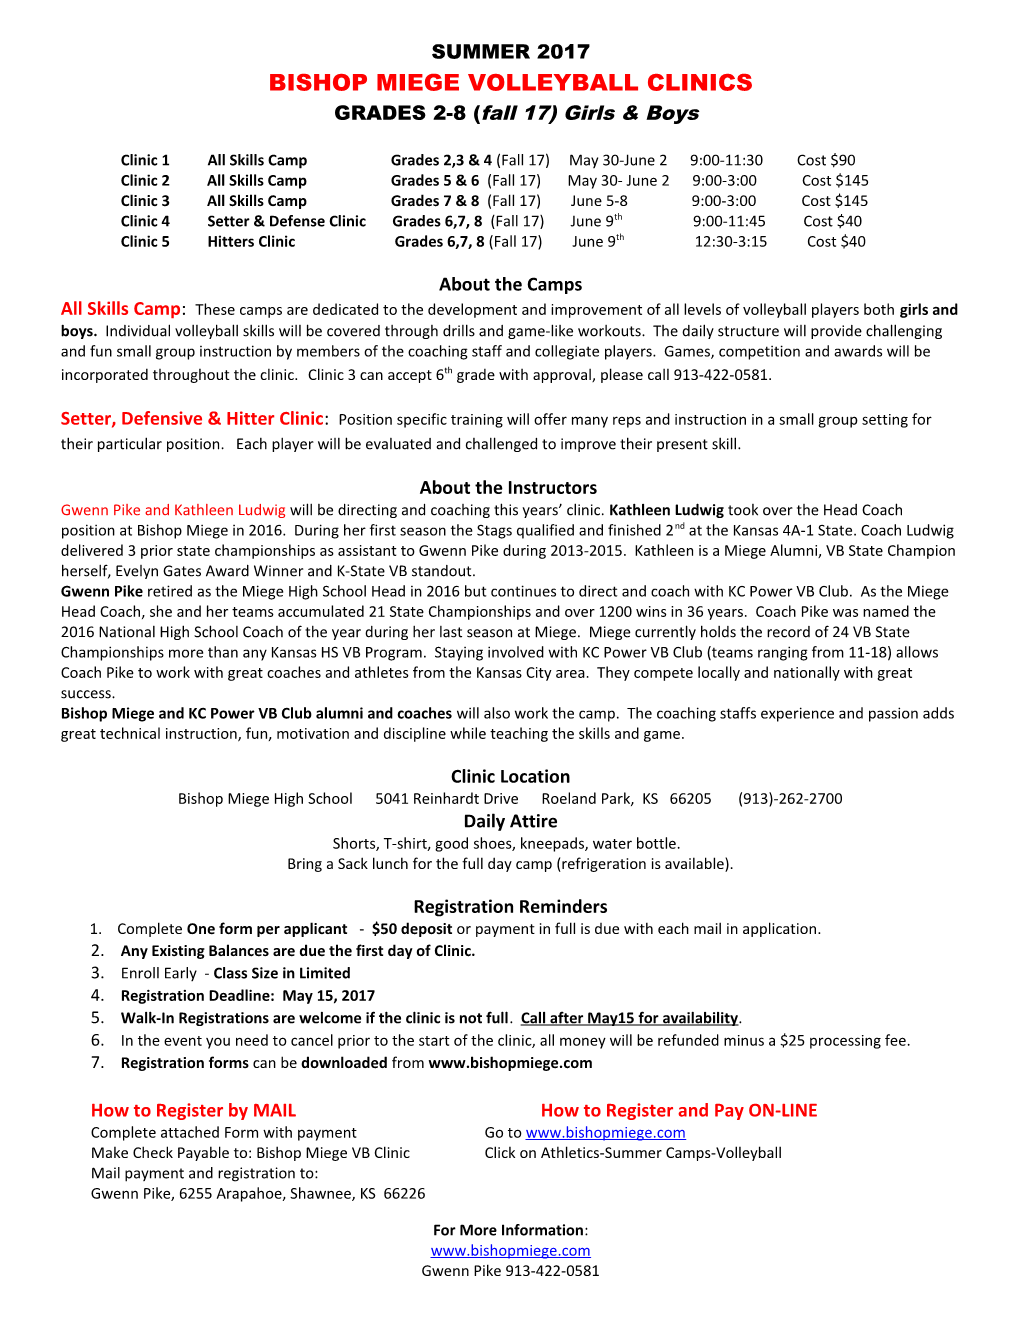 Bishop Miege Volleyball Clinics